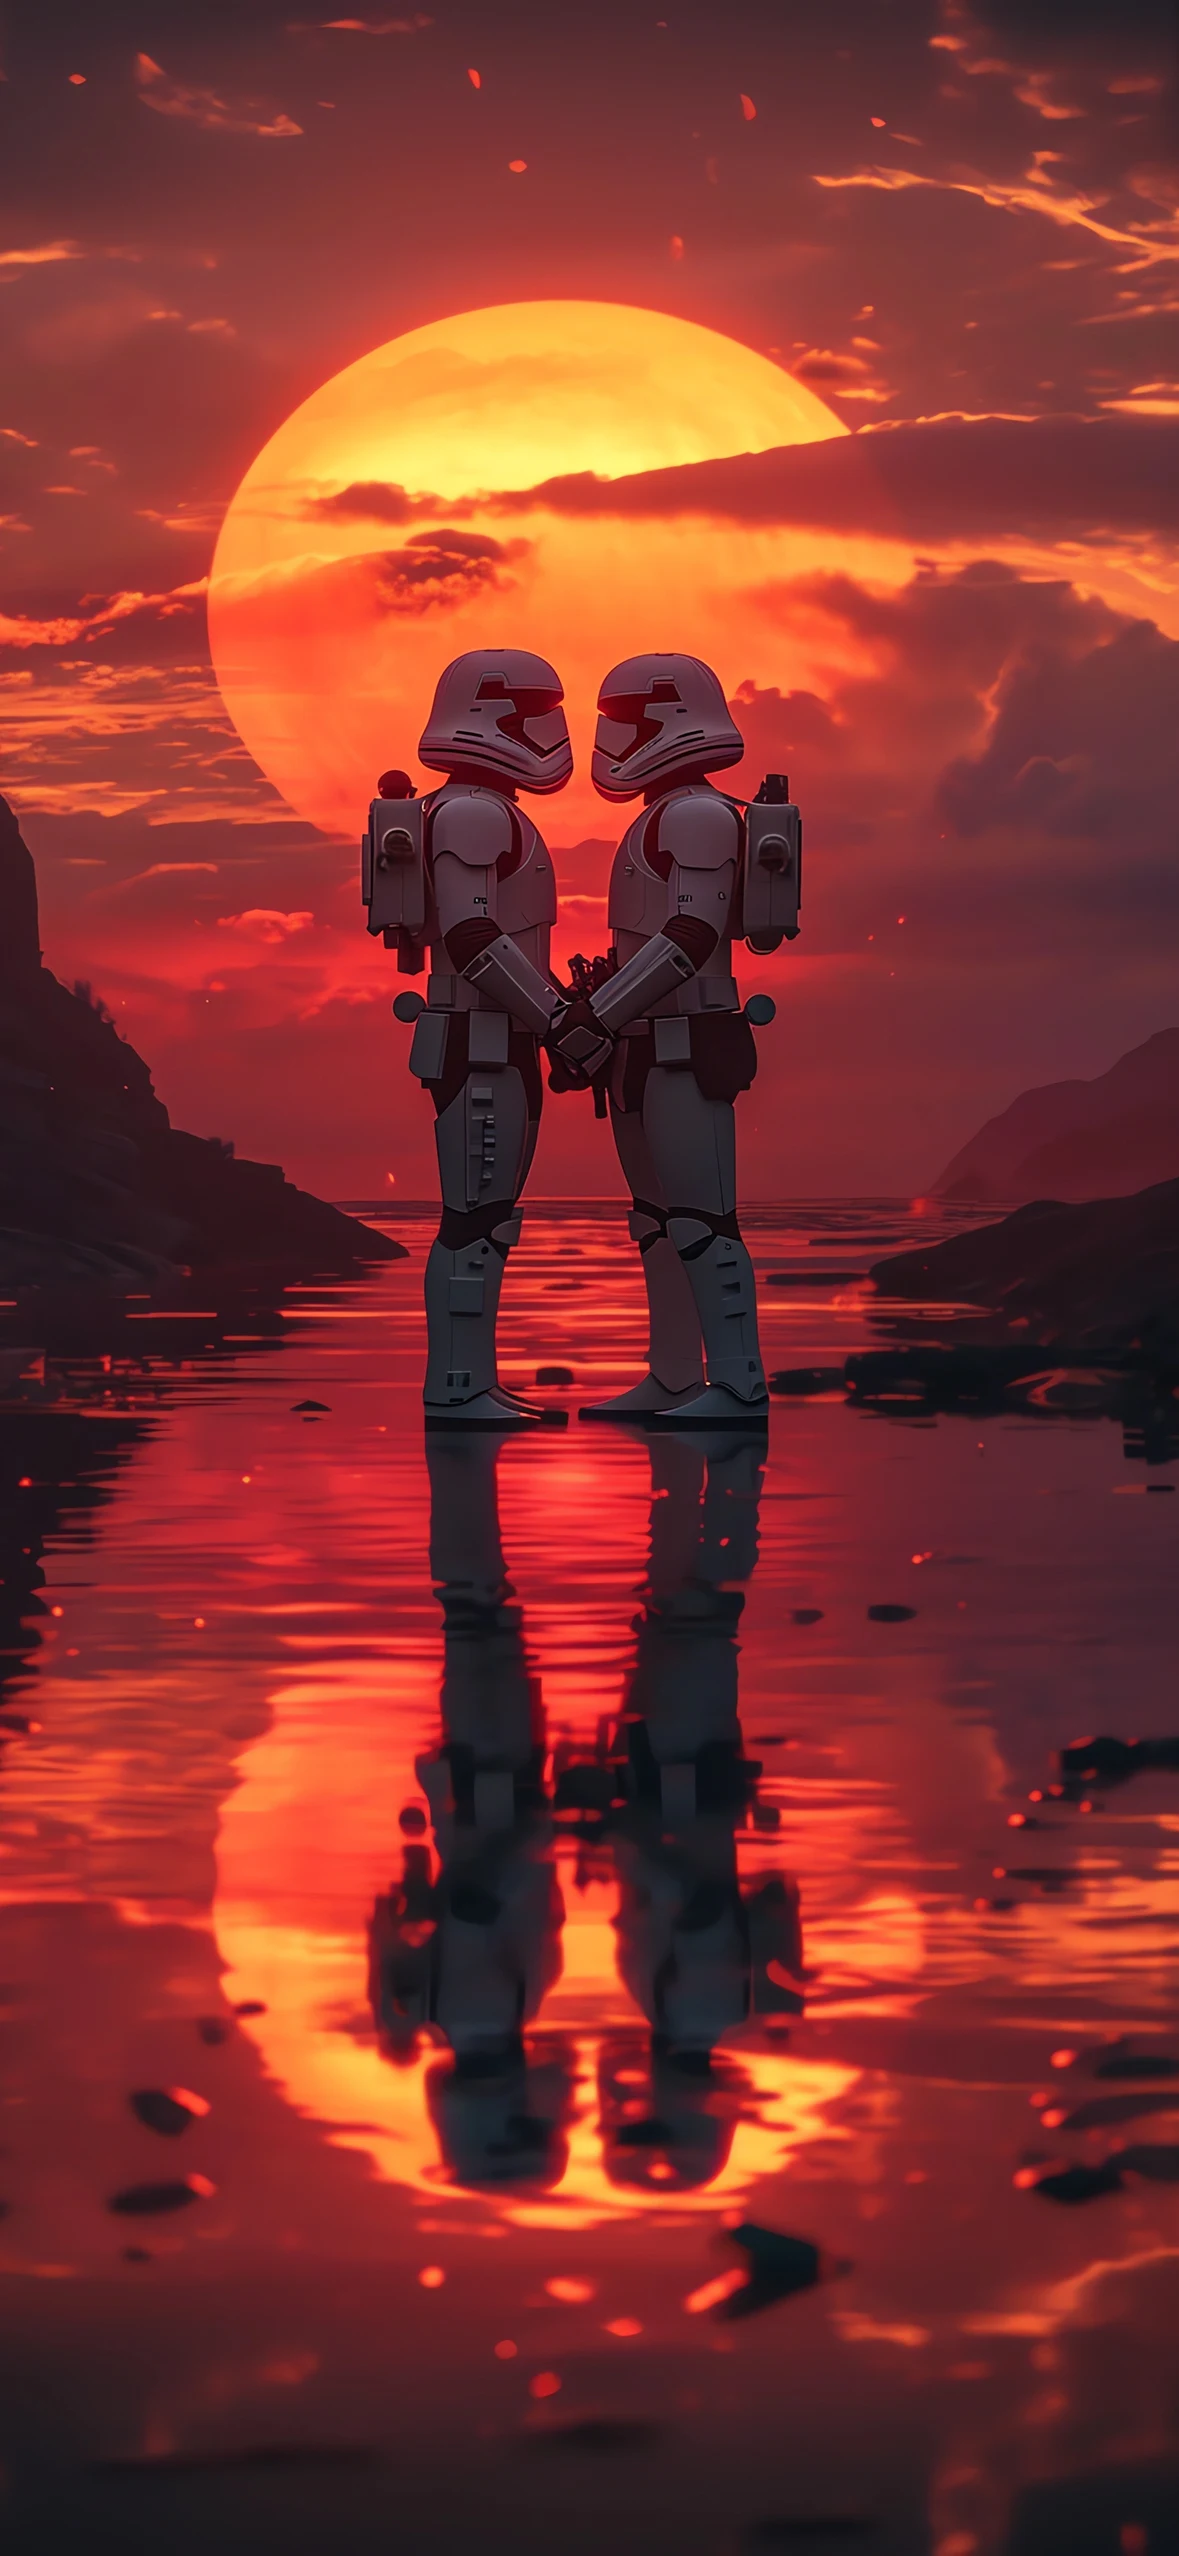 iPhone wallpaper showing two Stormtroopers holding hands against a romantic sunset and reflection on water.